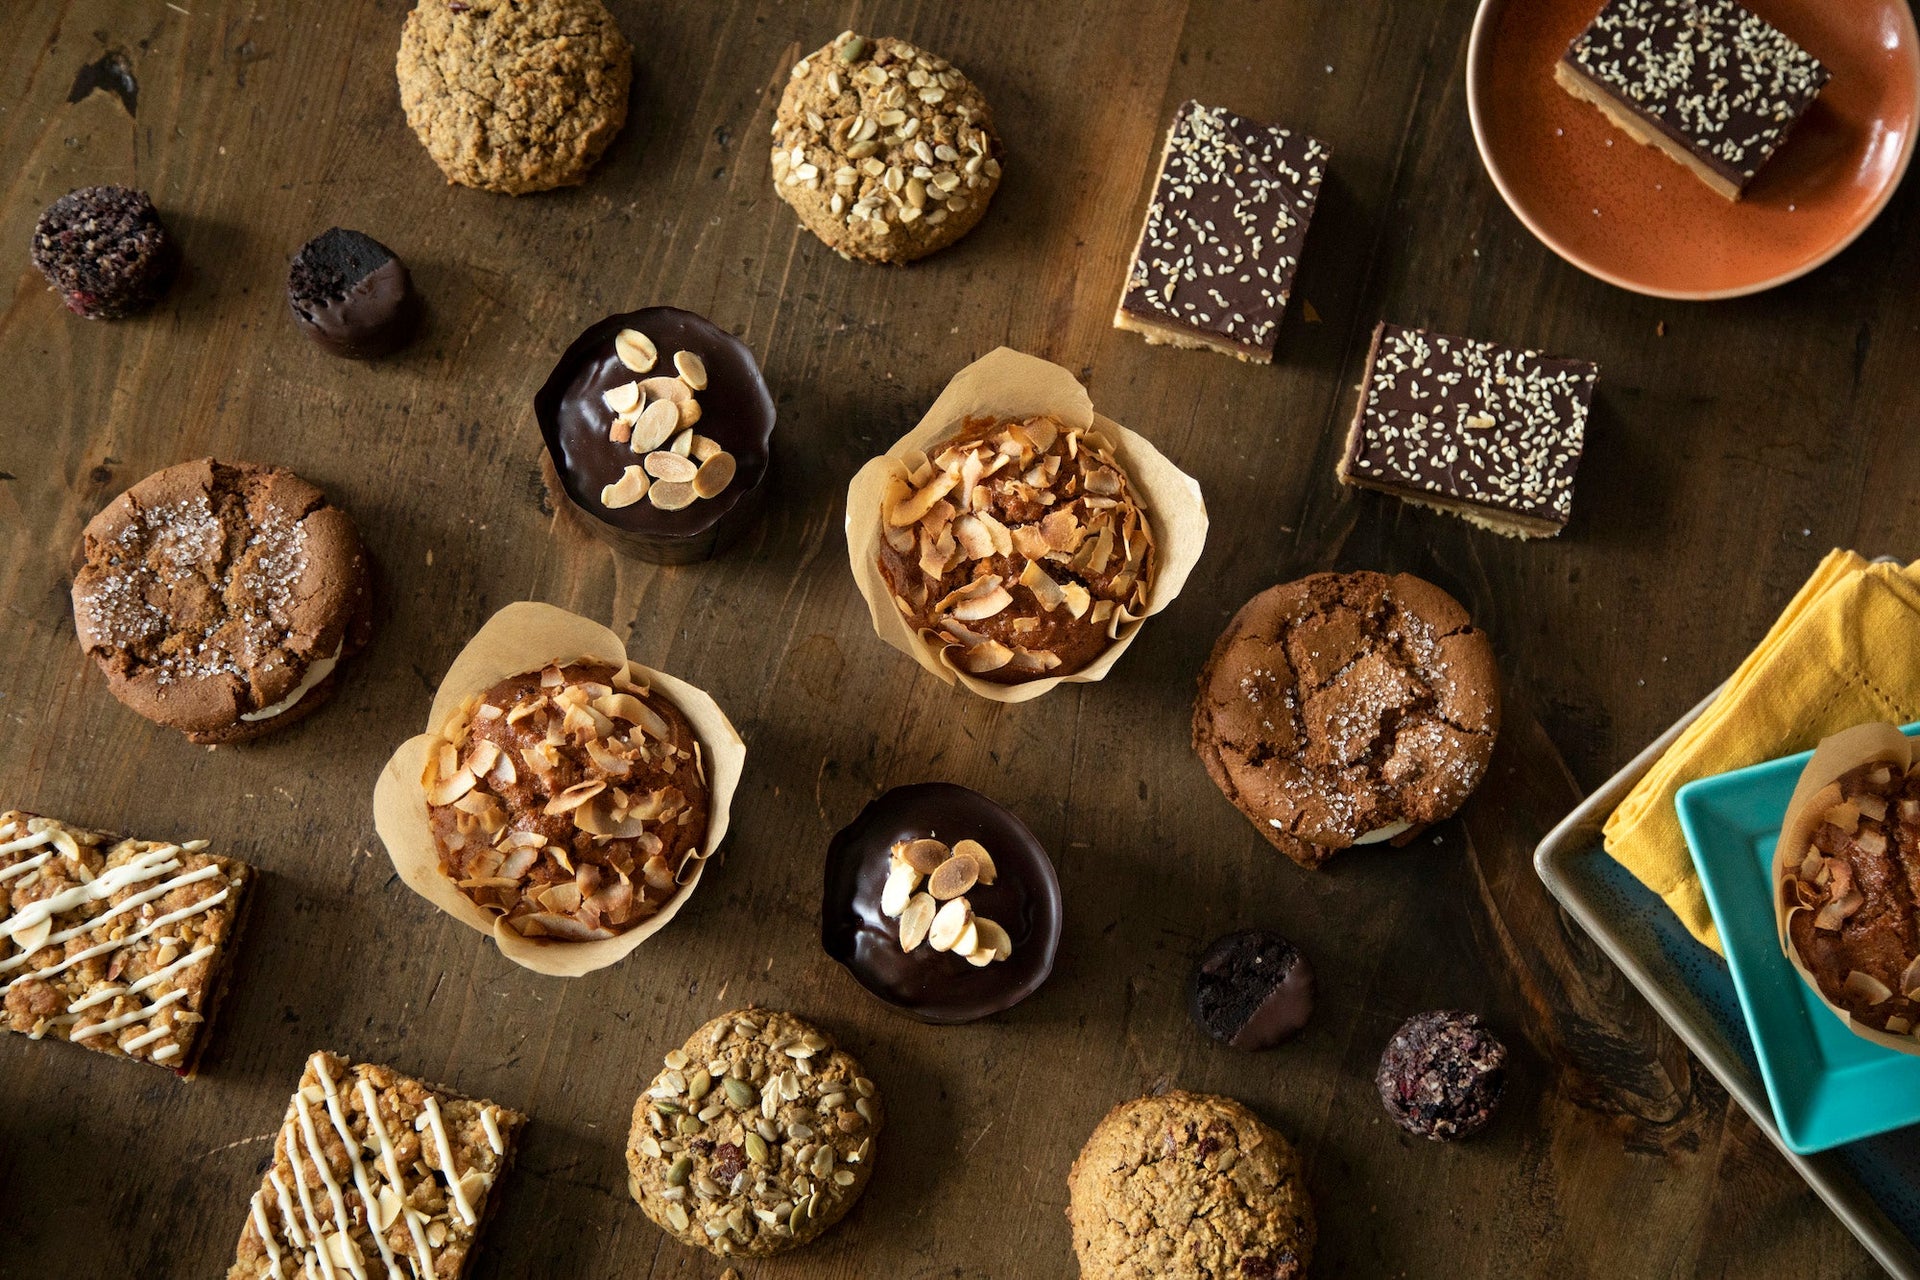 Introducing Our New Gluten-Free, Vegan Bakery!